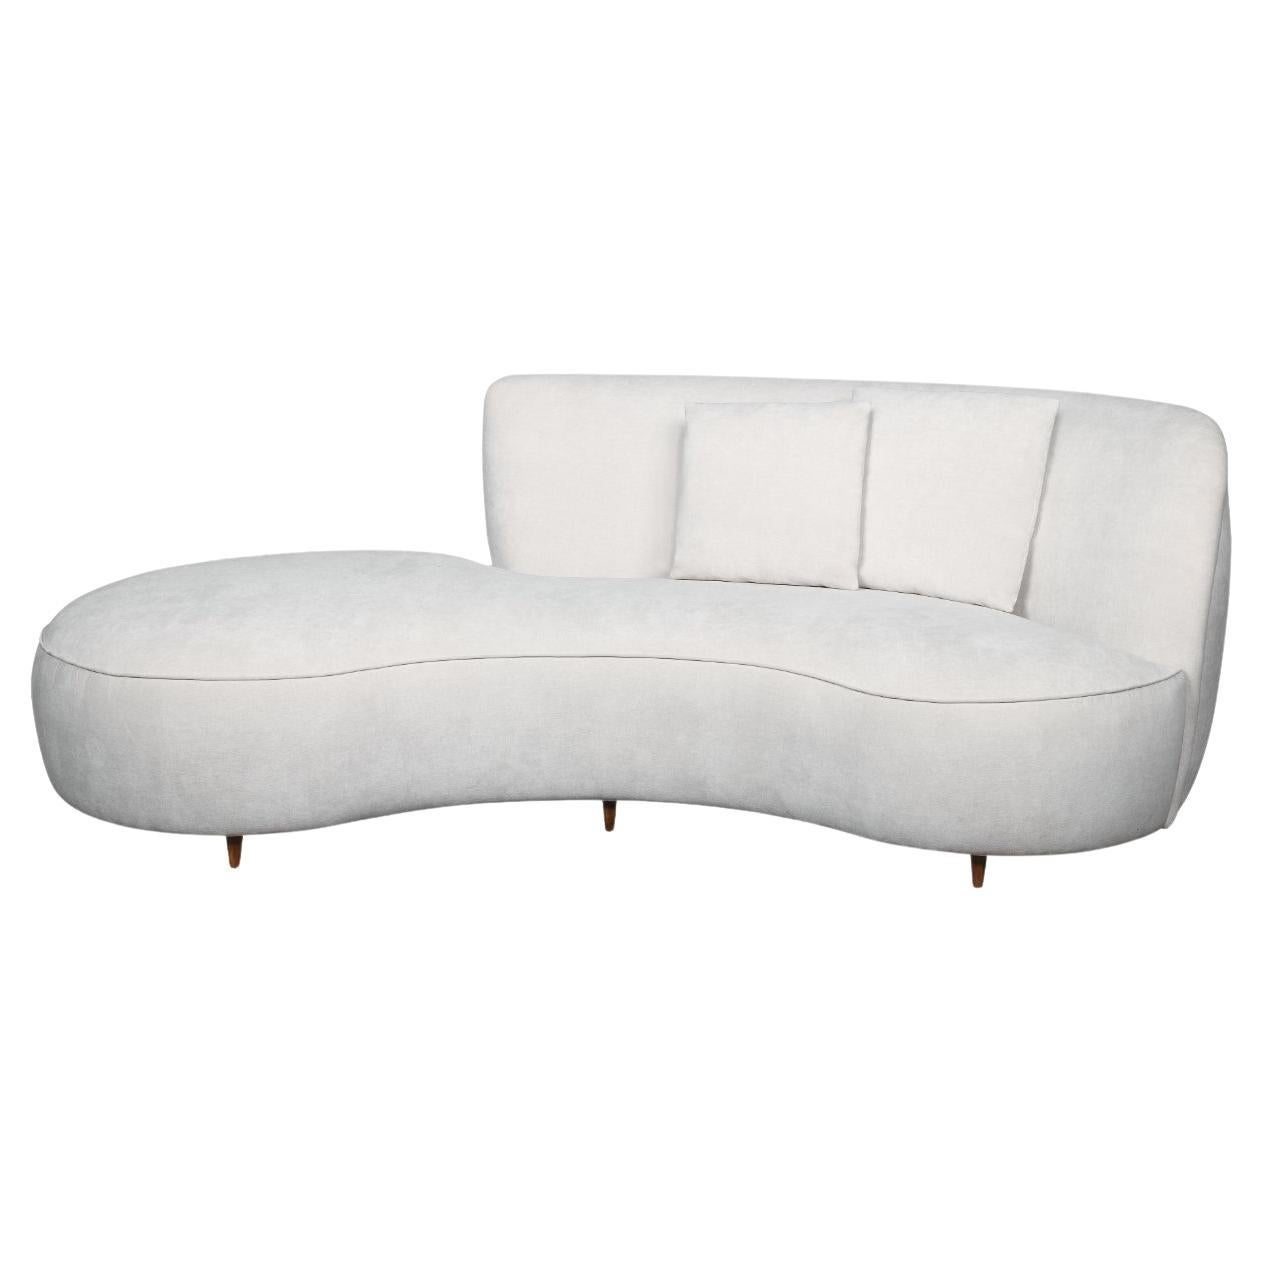 Curved Upholstered Siena Sofa, Wood Base and Tapered Legs